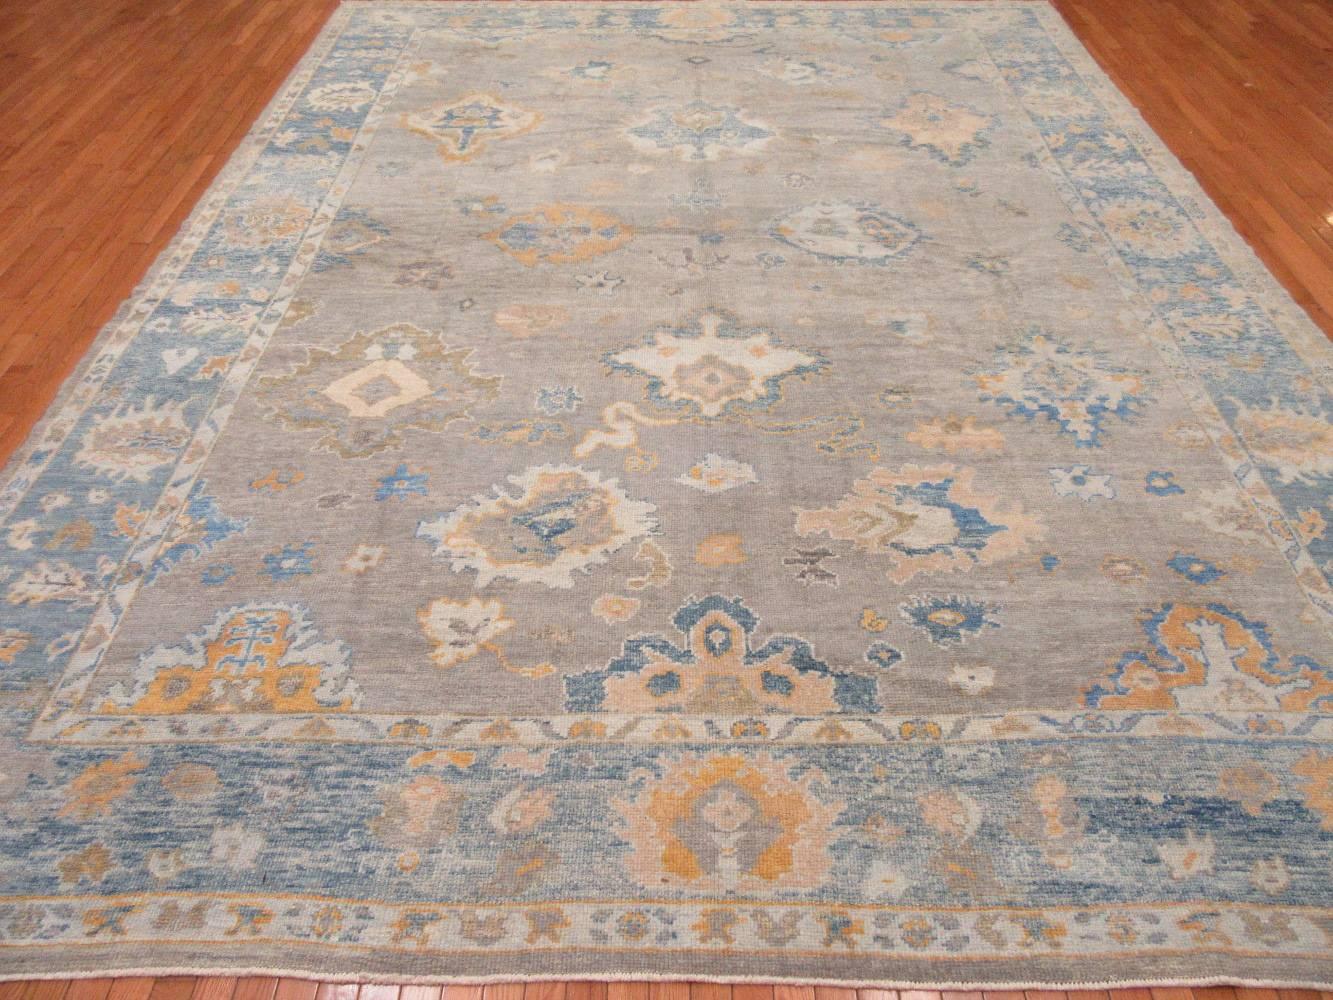 This is a large new hand-knotted wool rug from Turkey woven in the infamous Oushak design. It is a well constructed rug with primary colors of ivory, gray, blue and orange red. Its transitional design makes it an easy rug to work with for any room